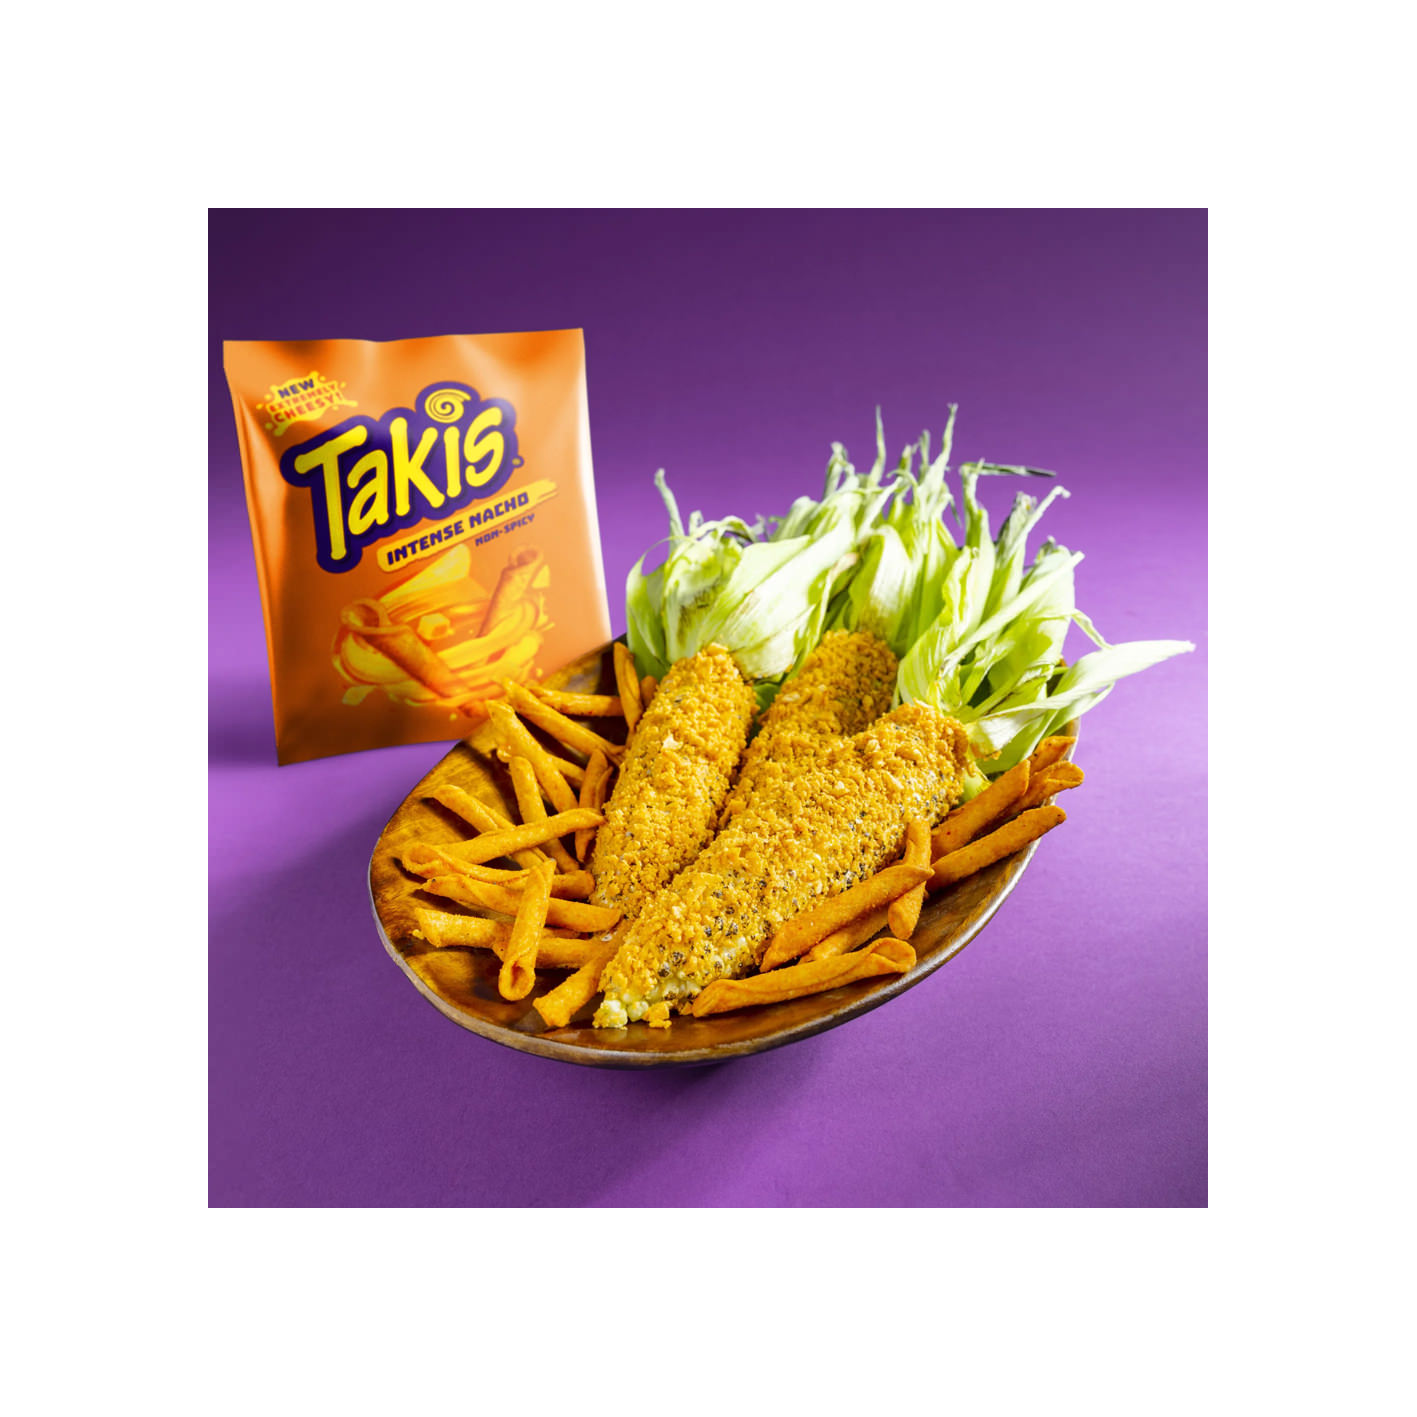 Takis Intense Nacho Cheese Rolled Tortilla Chips, 9.9 oz - Fry's Food Stores